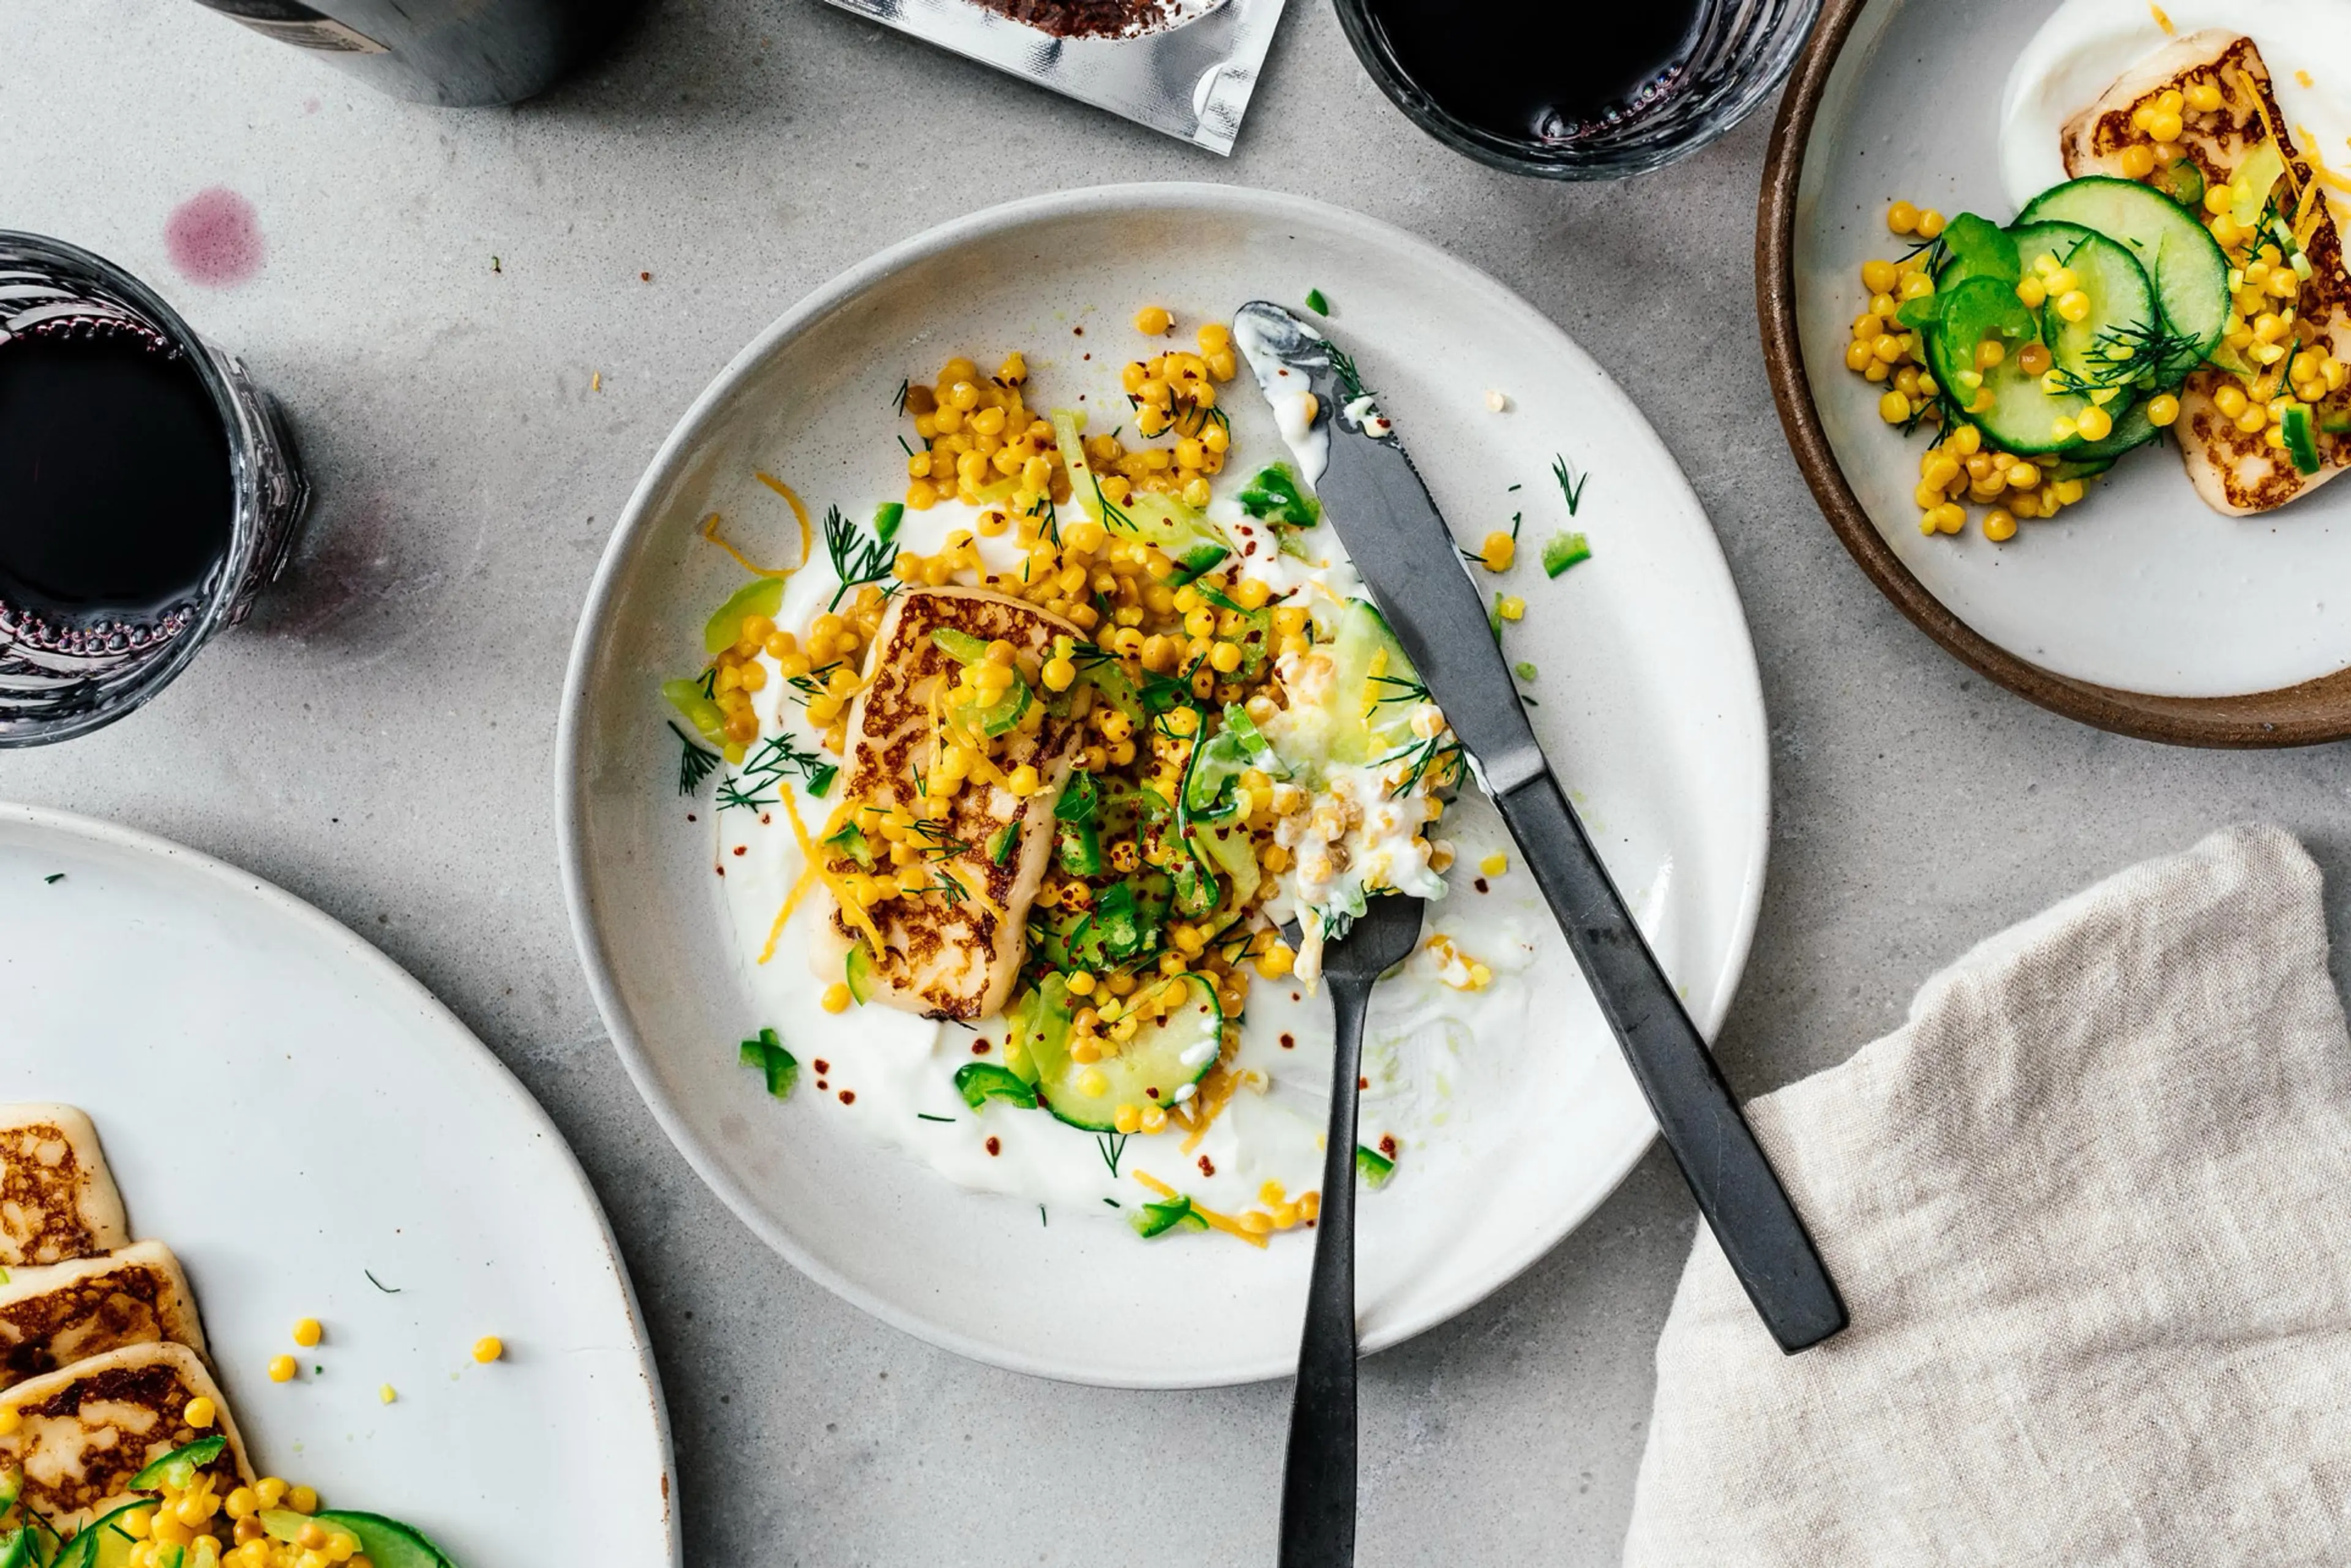 Pan-fried Halloumi with Israeli cous cous salad recipe